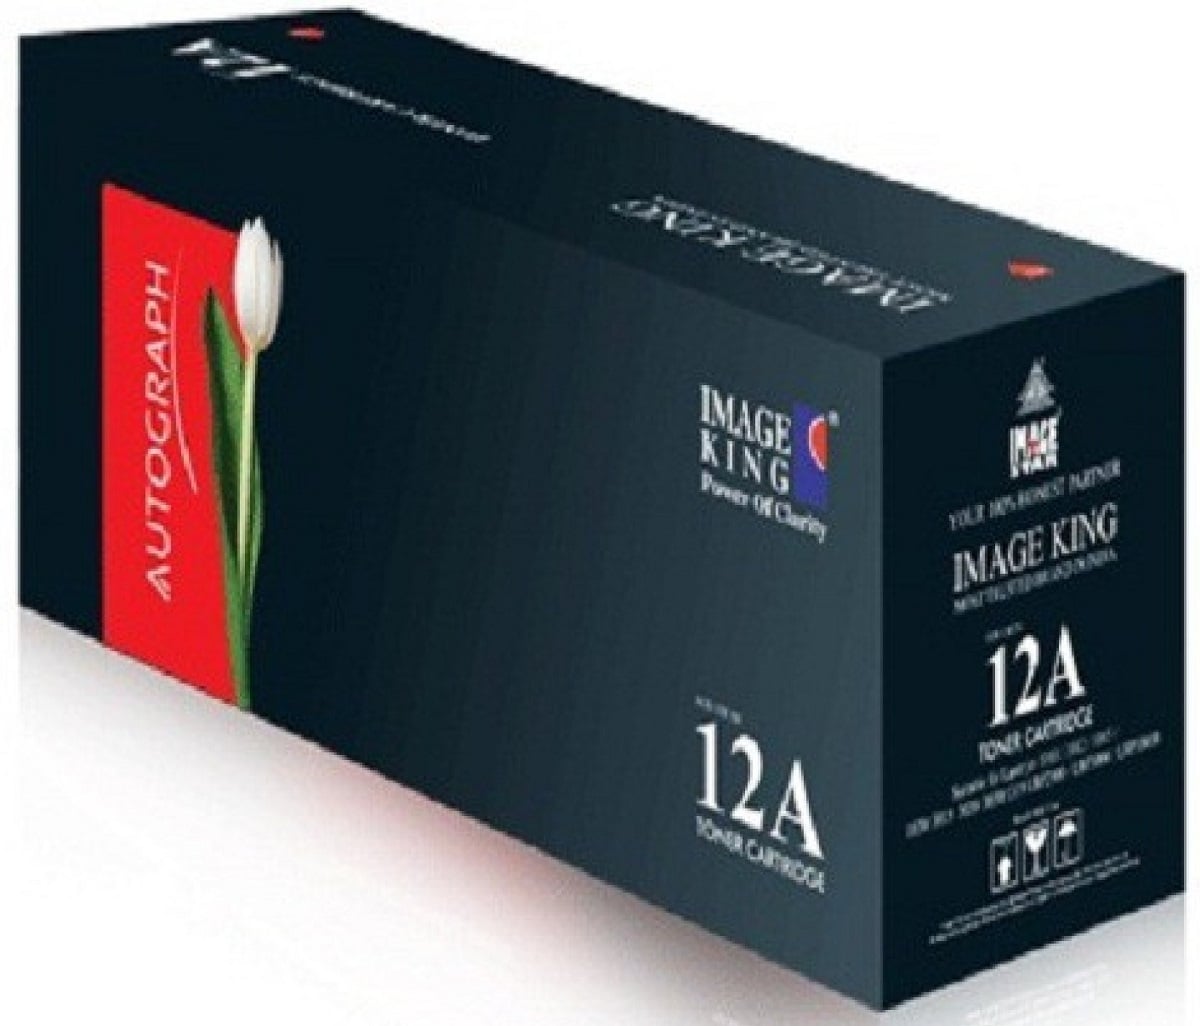 Image King Launches New Brother Compatible Toner Cartridges